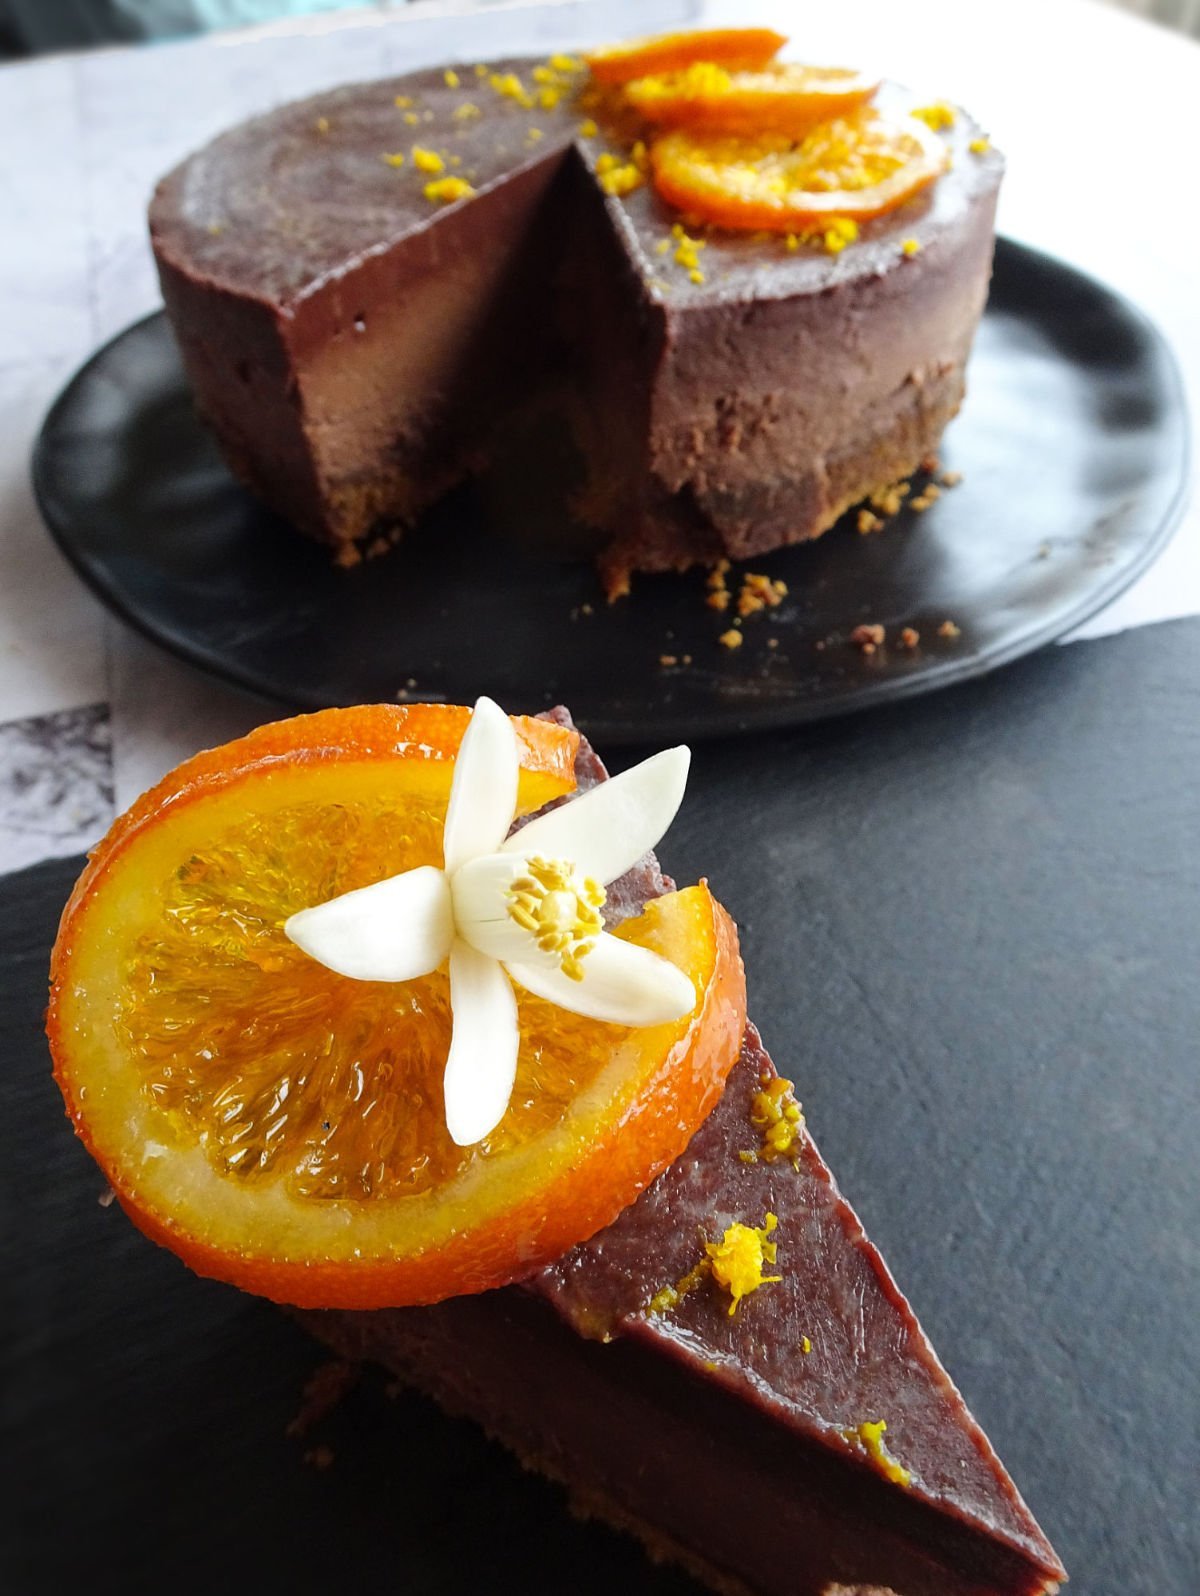 baked orange chocolate cheesecake is garnished with candied orange slices and some orange blossoms